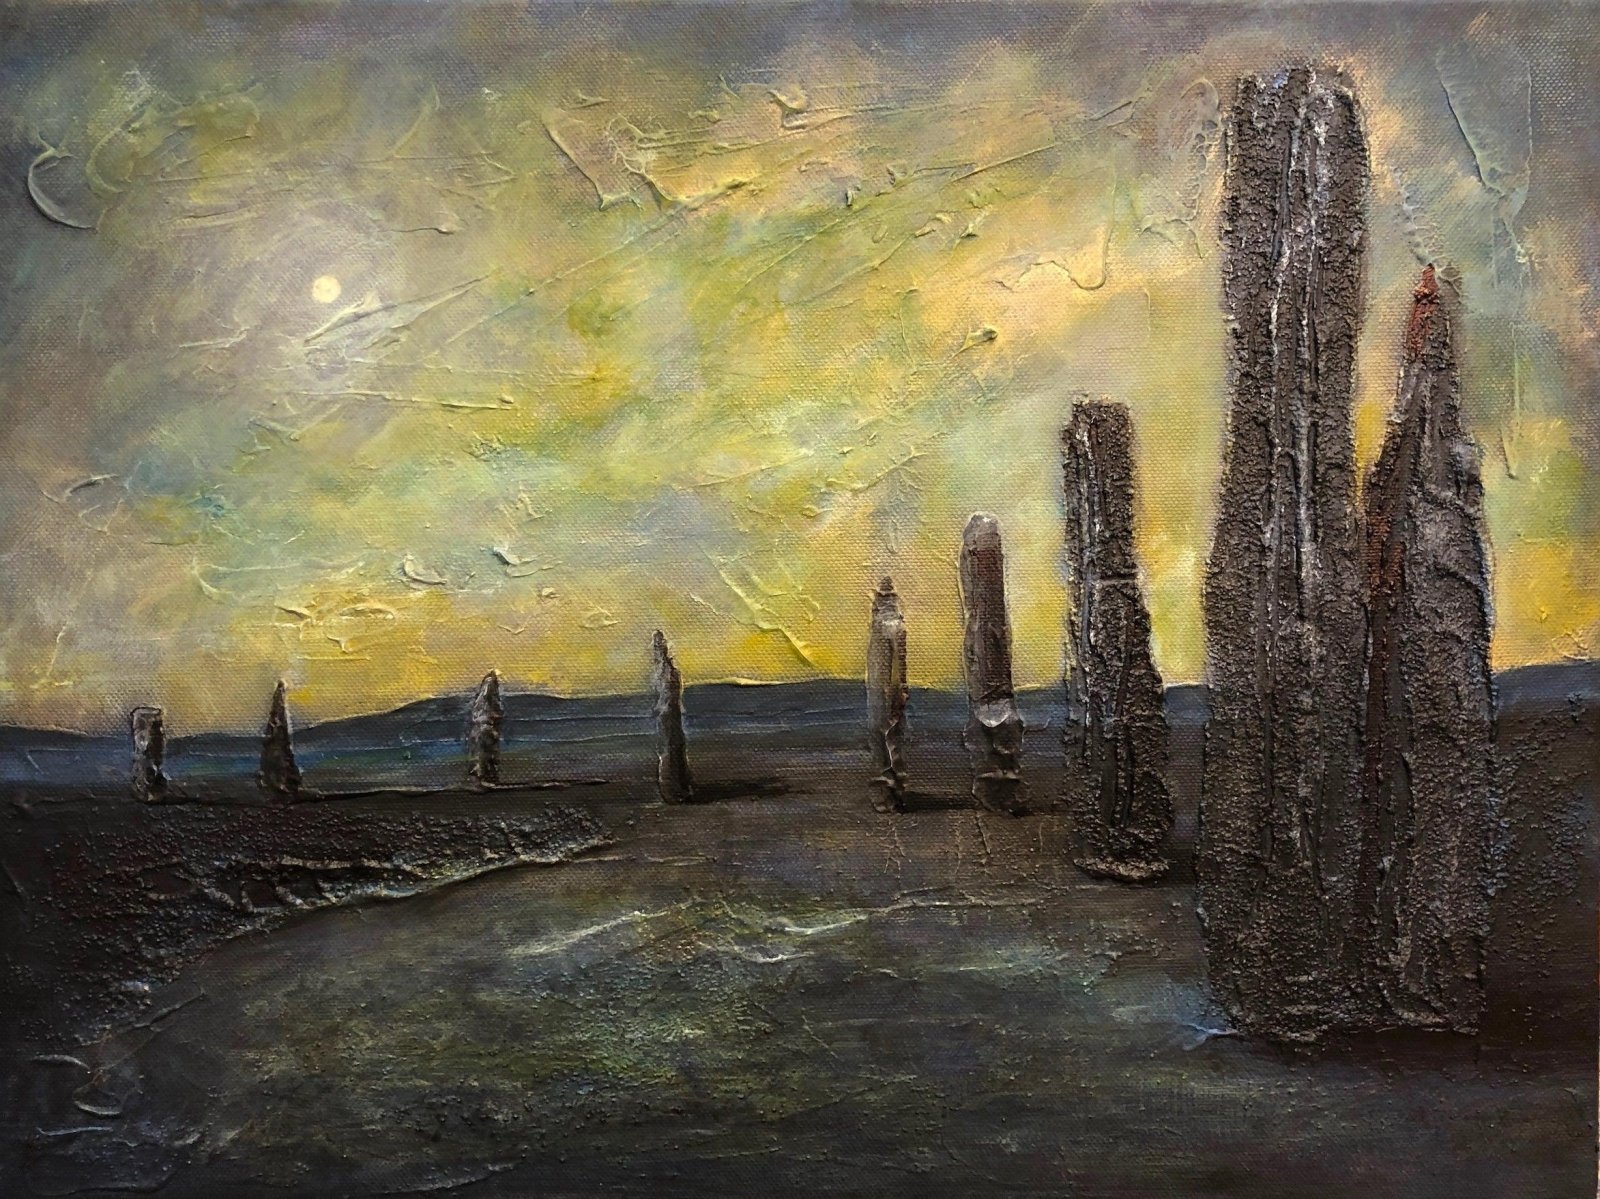 An Ethereal Ring Of Brodgar Orkney-Signed Art Prints By Scottish Artist Hunter-Orkney Art Gallery-Paintings, Prints, Homeware, Art Gifts From Scotland By Scottish Artist Kevin Hunter